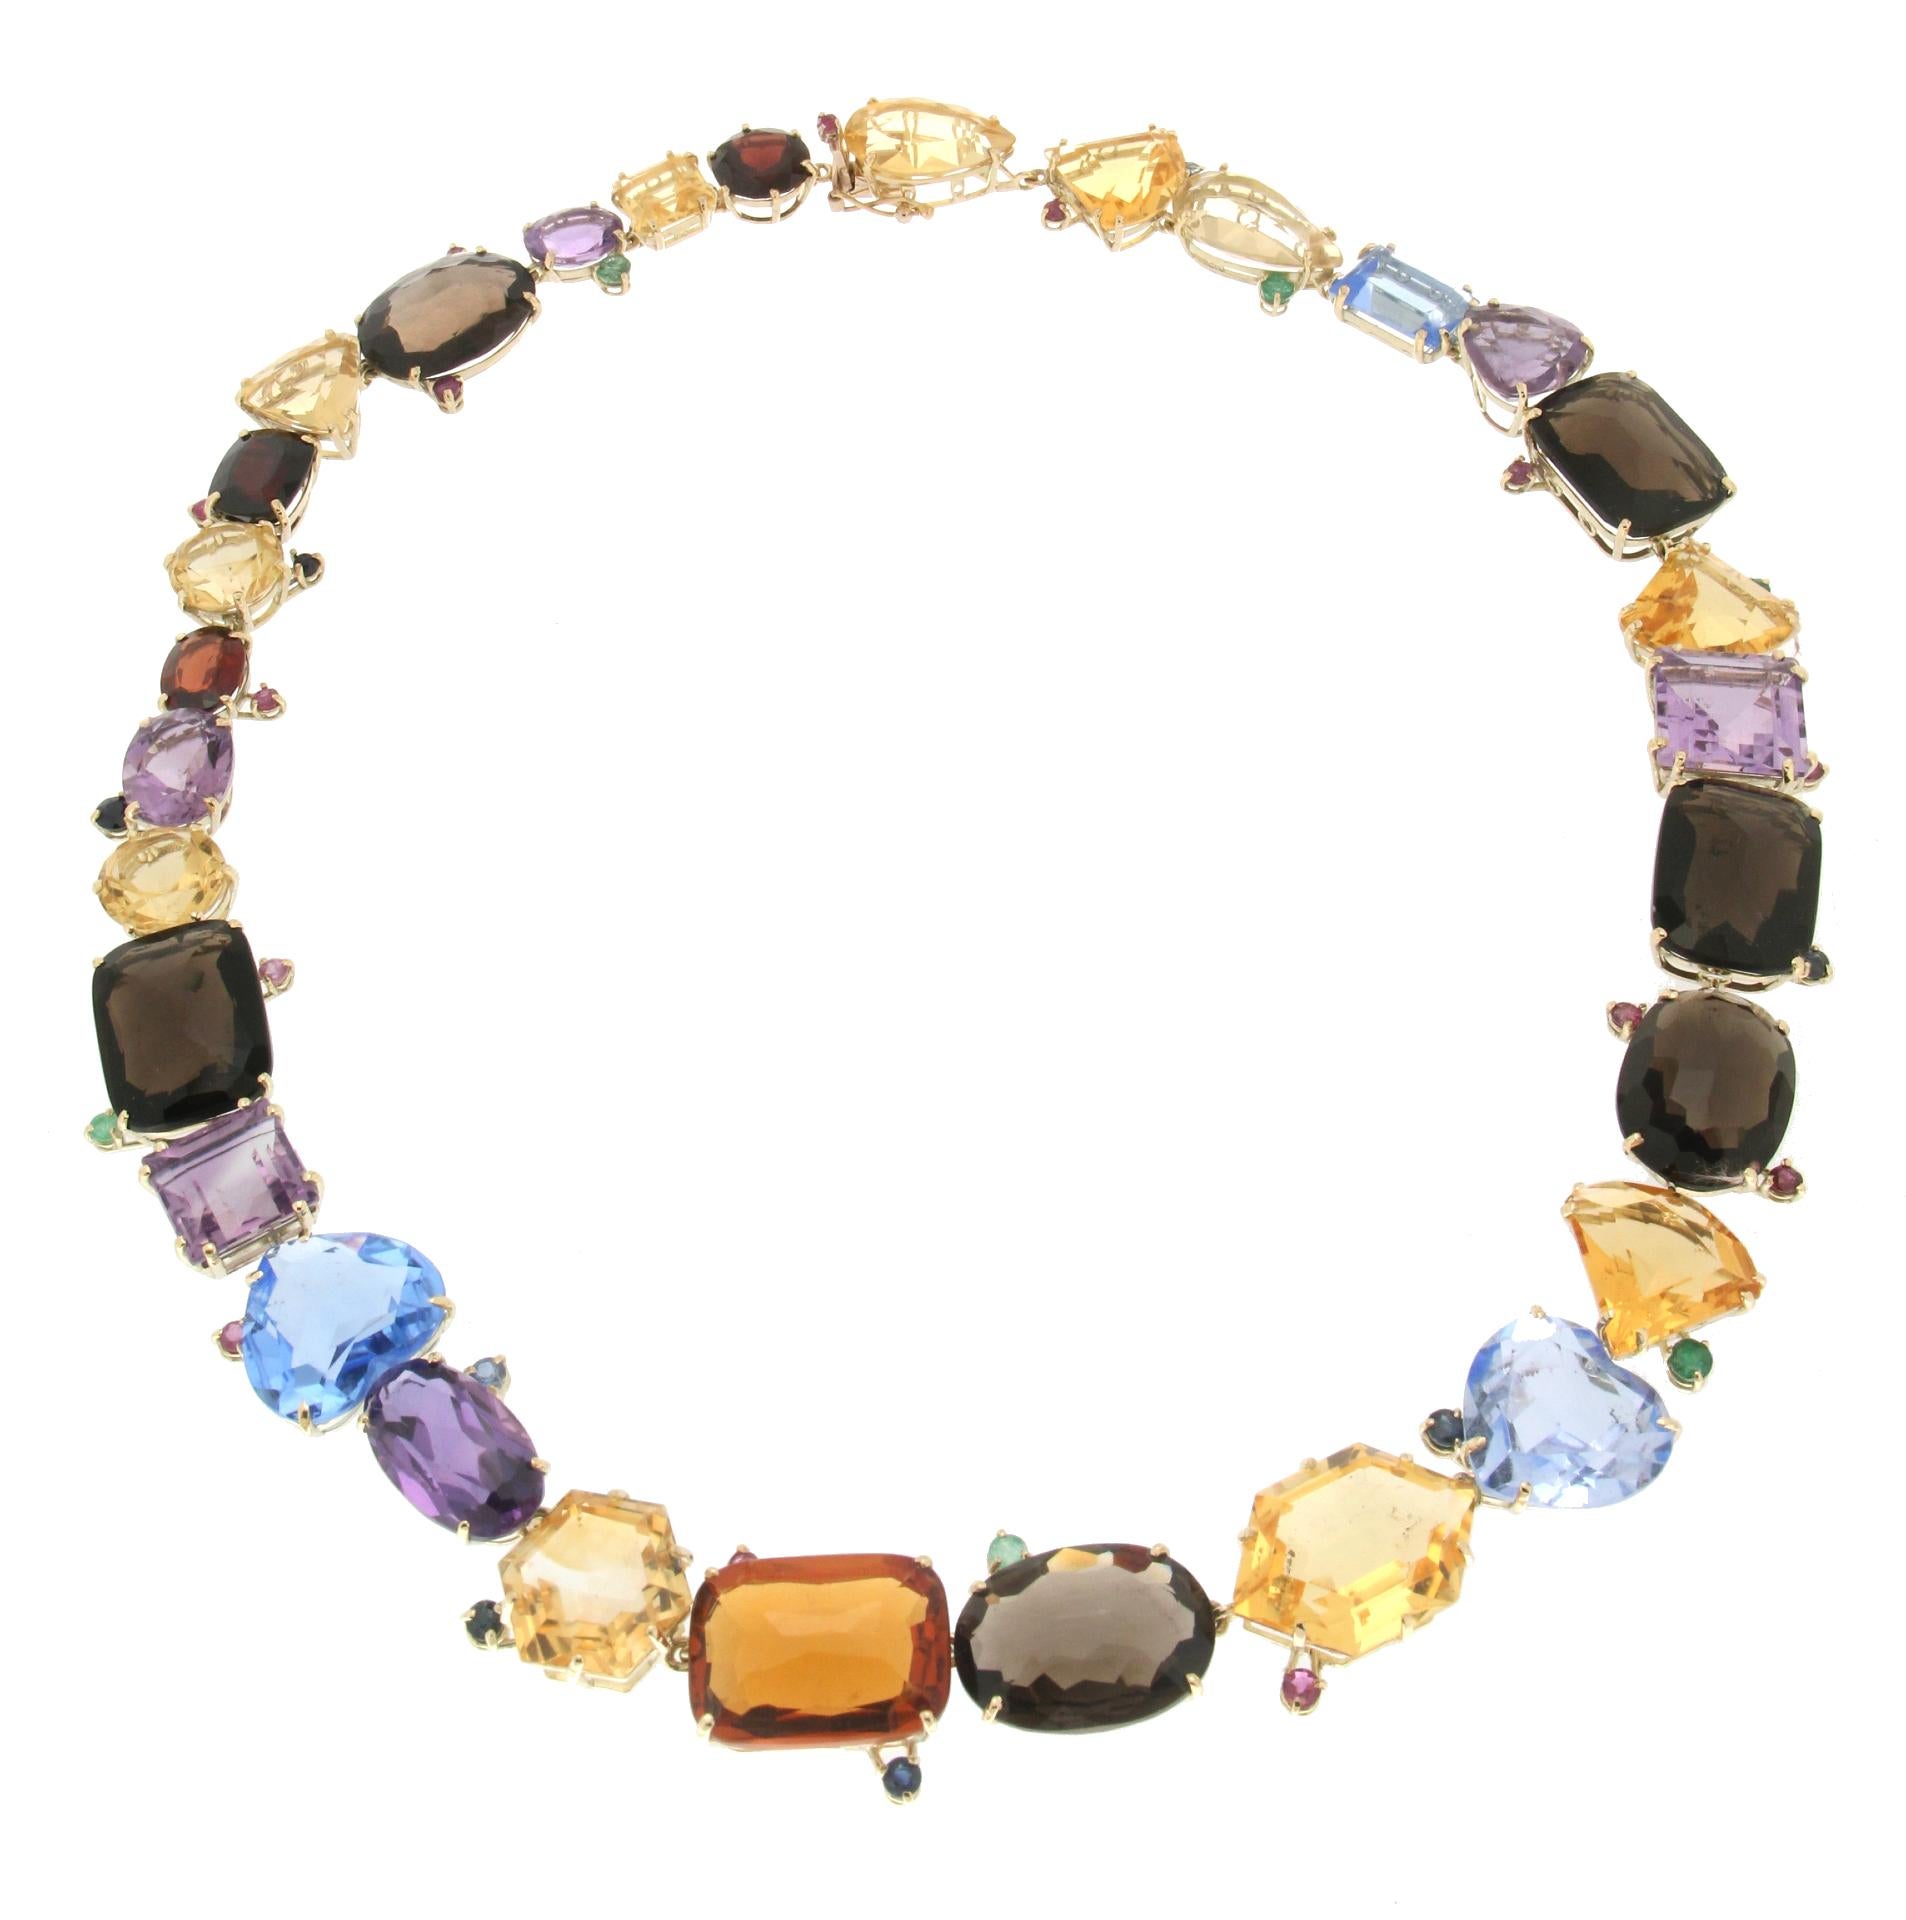 Magnificent necklace made entirely by hand by our expert craftsmen in 14 carat yellow gold, composed of gems of various types of cut. Citrines, amethysts, garnets while small emeralds, sapphires and rubies are the side dish.

The necklace has a